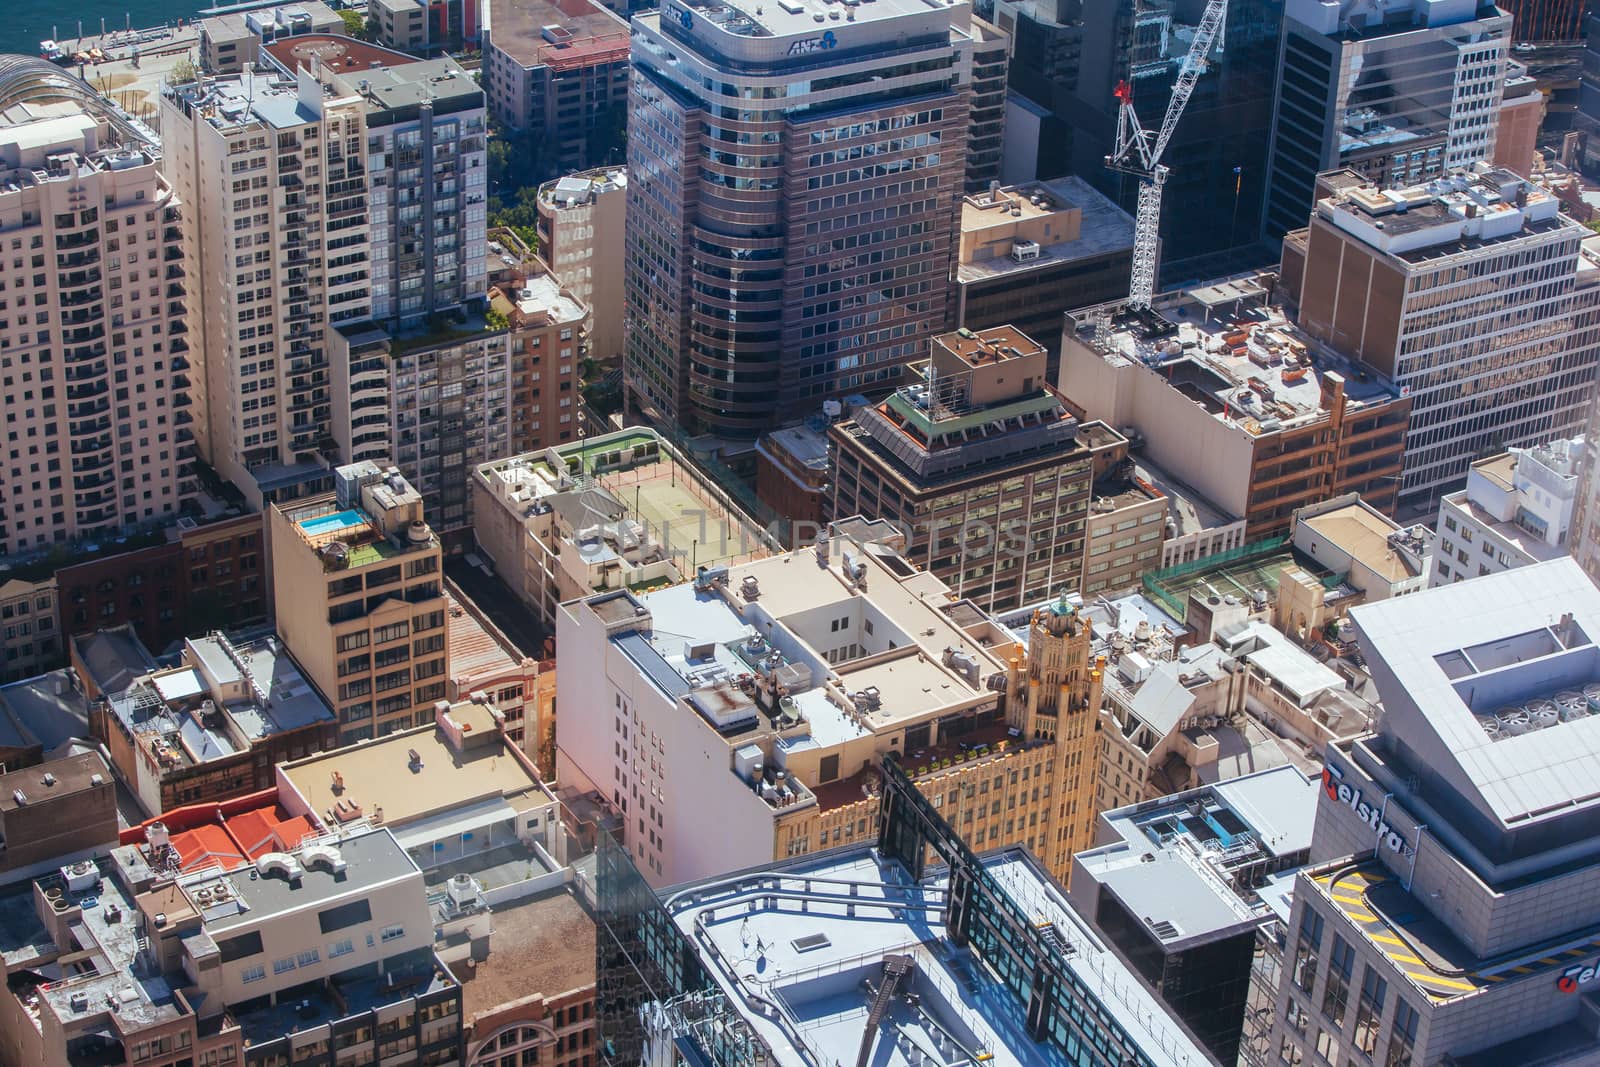 An aerial view of Sydney's buildings and architecture on a clear sunny day in NSW, Australia